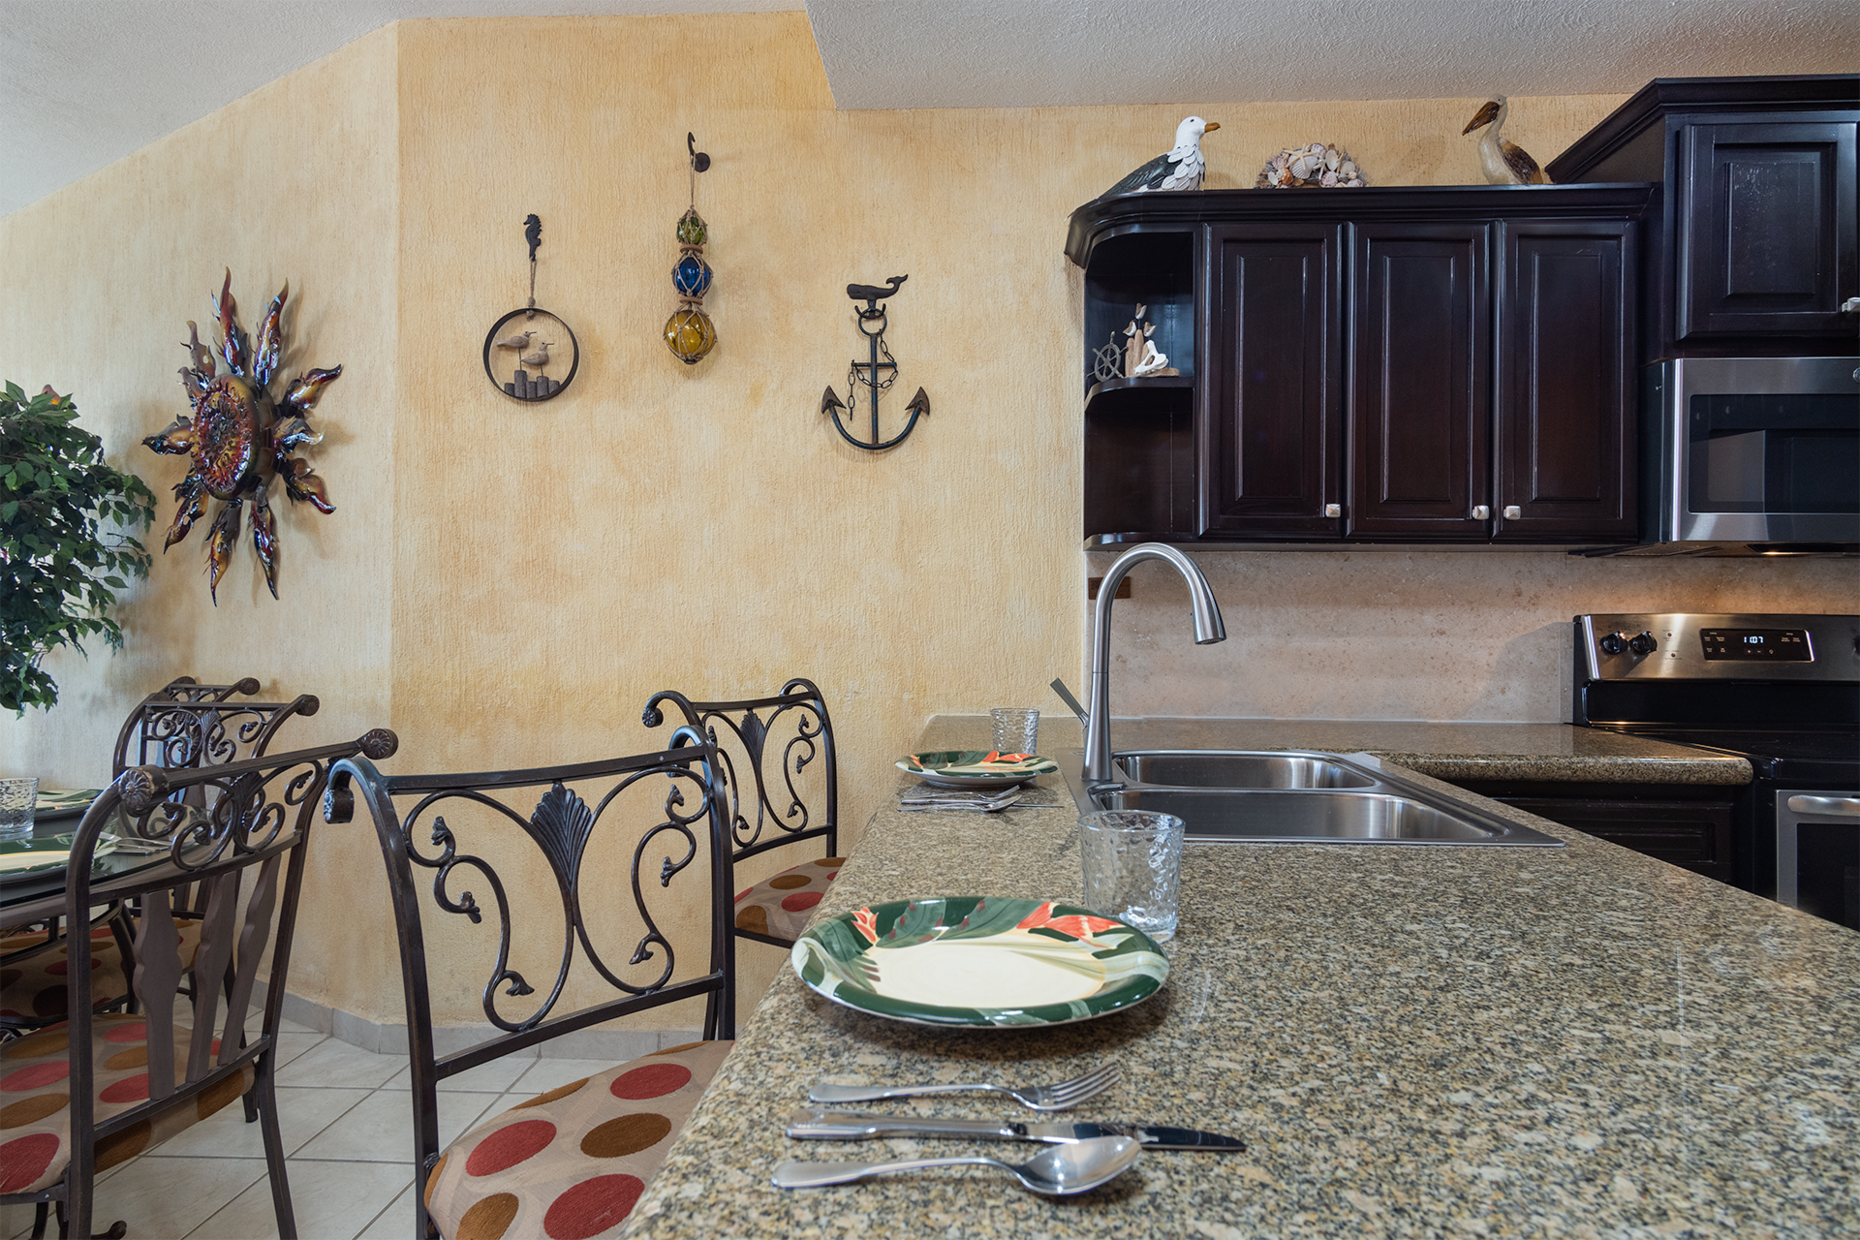 High backed seats at the kitchen counter provide an extra place to enjoy a meal.